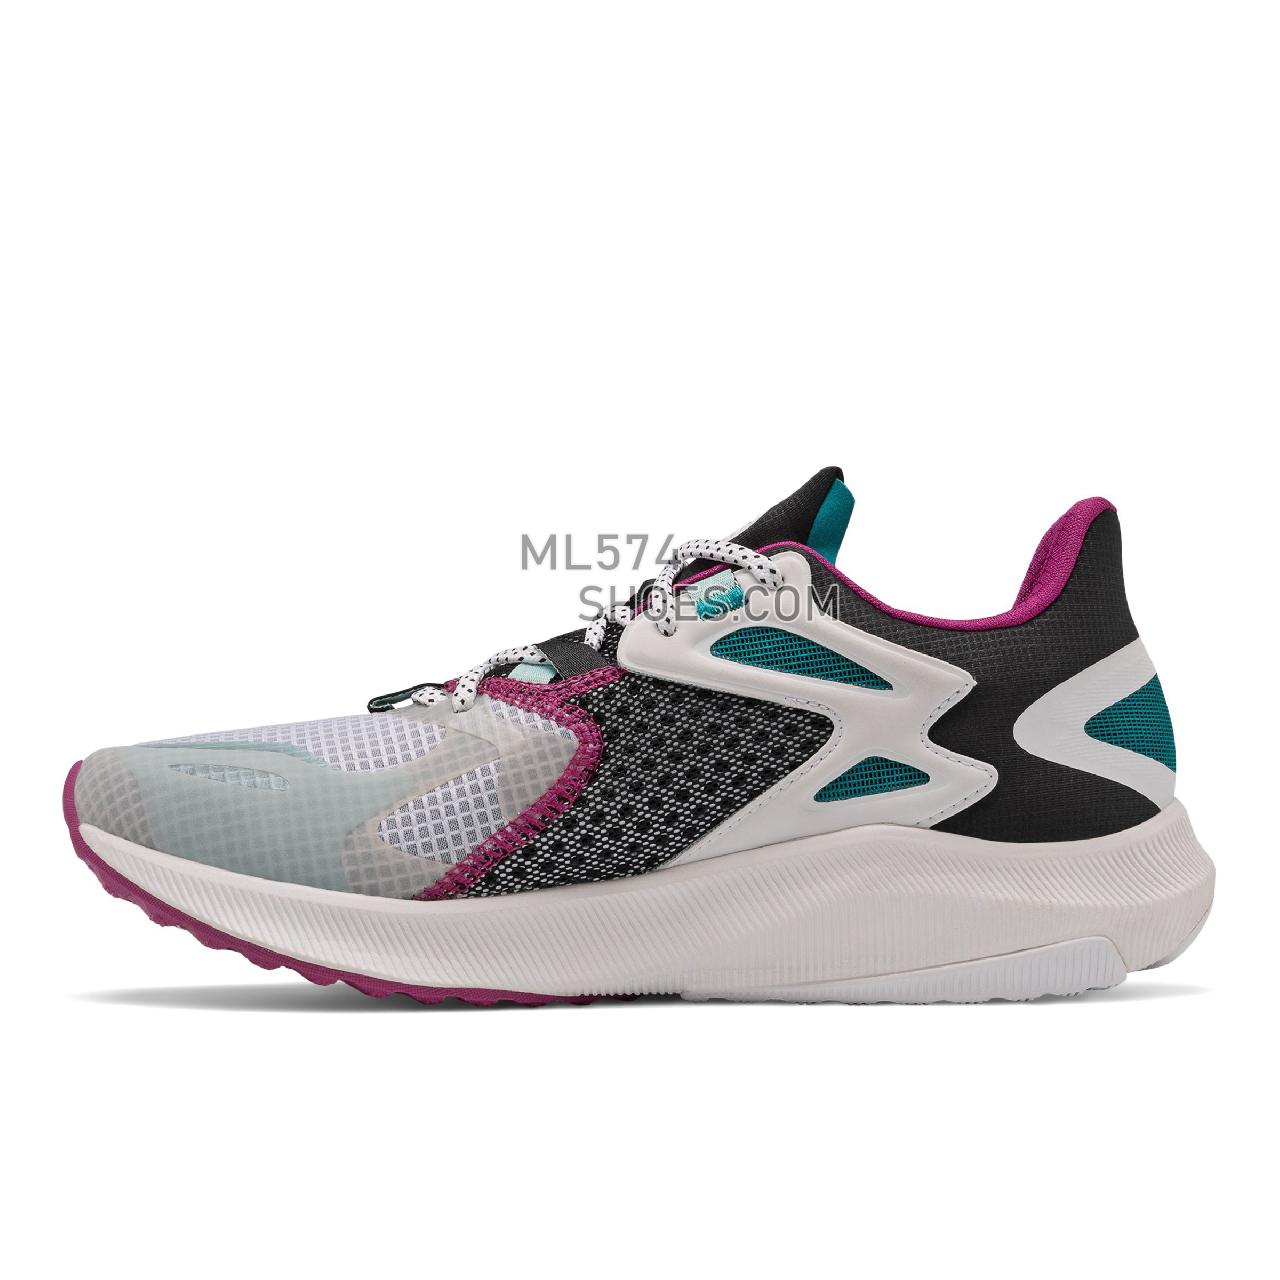 New Balance FuelCell Propel RMX - Men's Neutral Running - White with Team Teal and Jewel - MPRMXLW